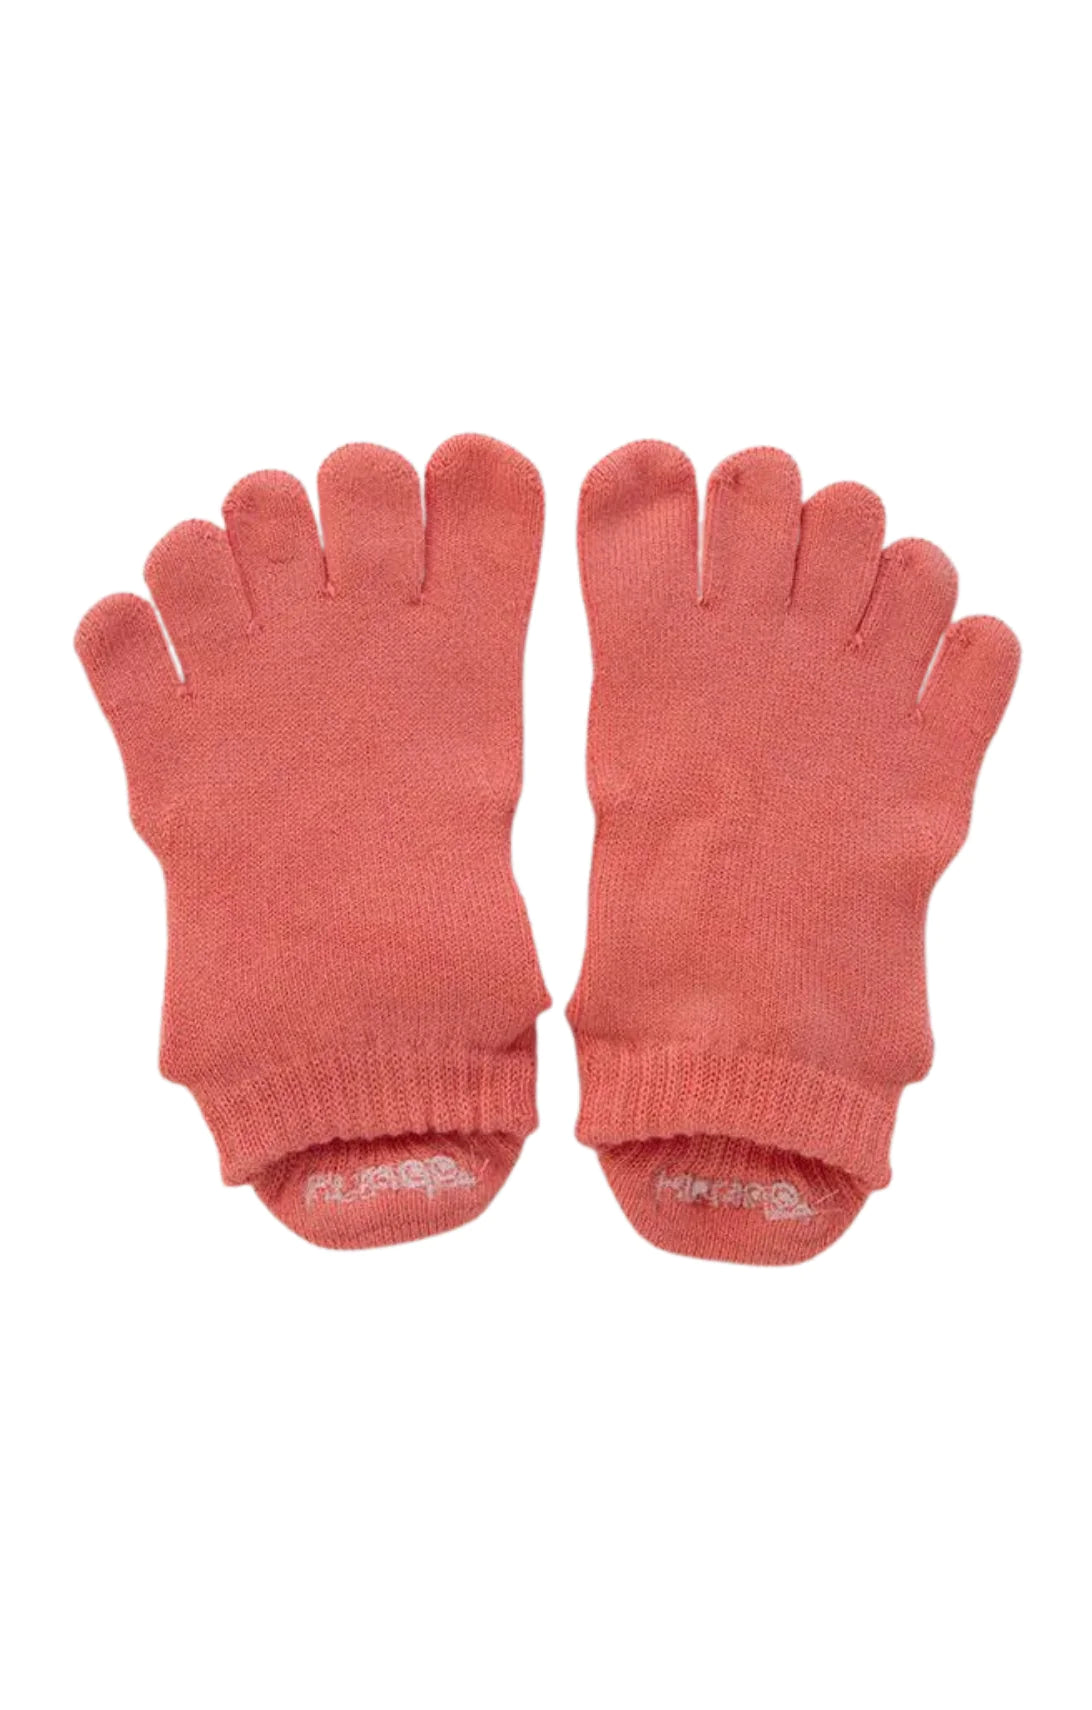 Knitido plus's Basic Solid Colors Footie Grip Toe Socks With Power Pads in Coral